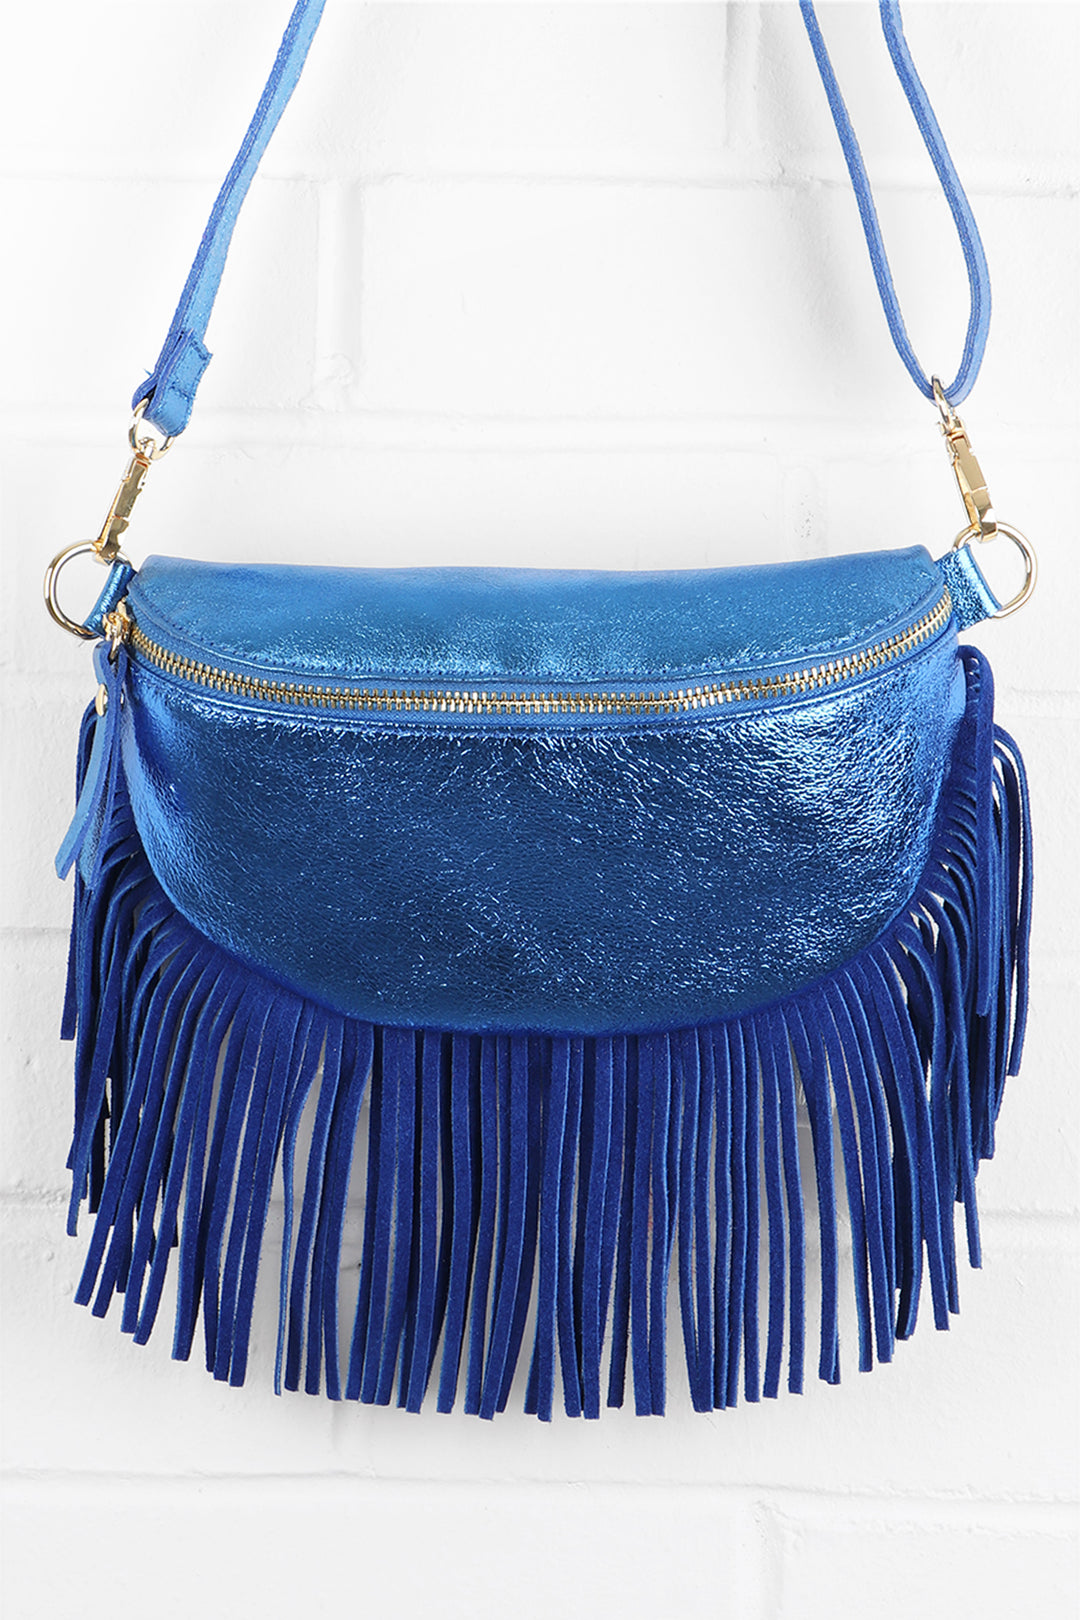 metallic blue leather halfmoon bag with fringed trim and zip closure